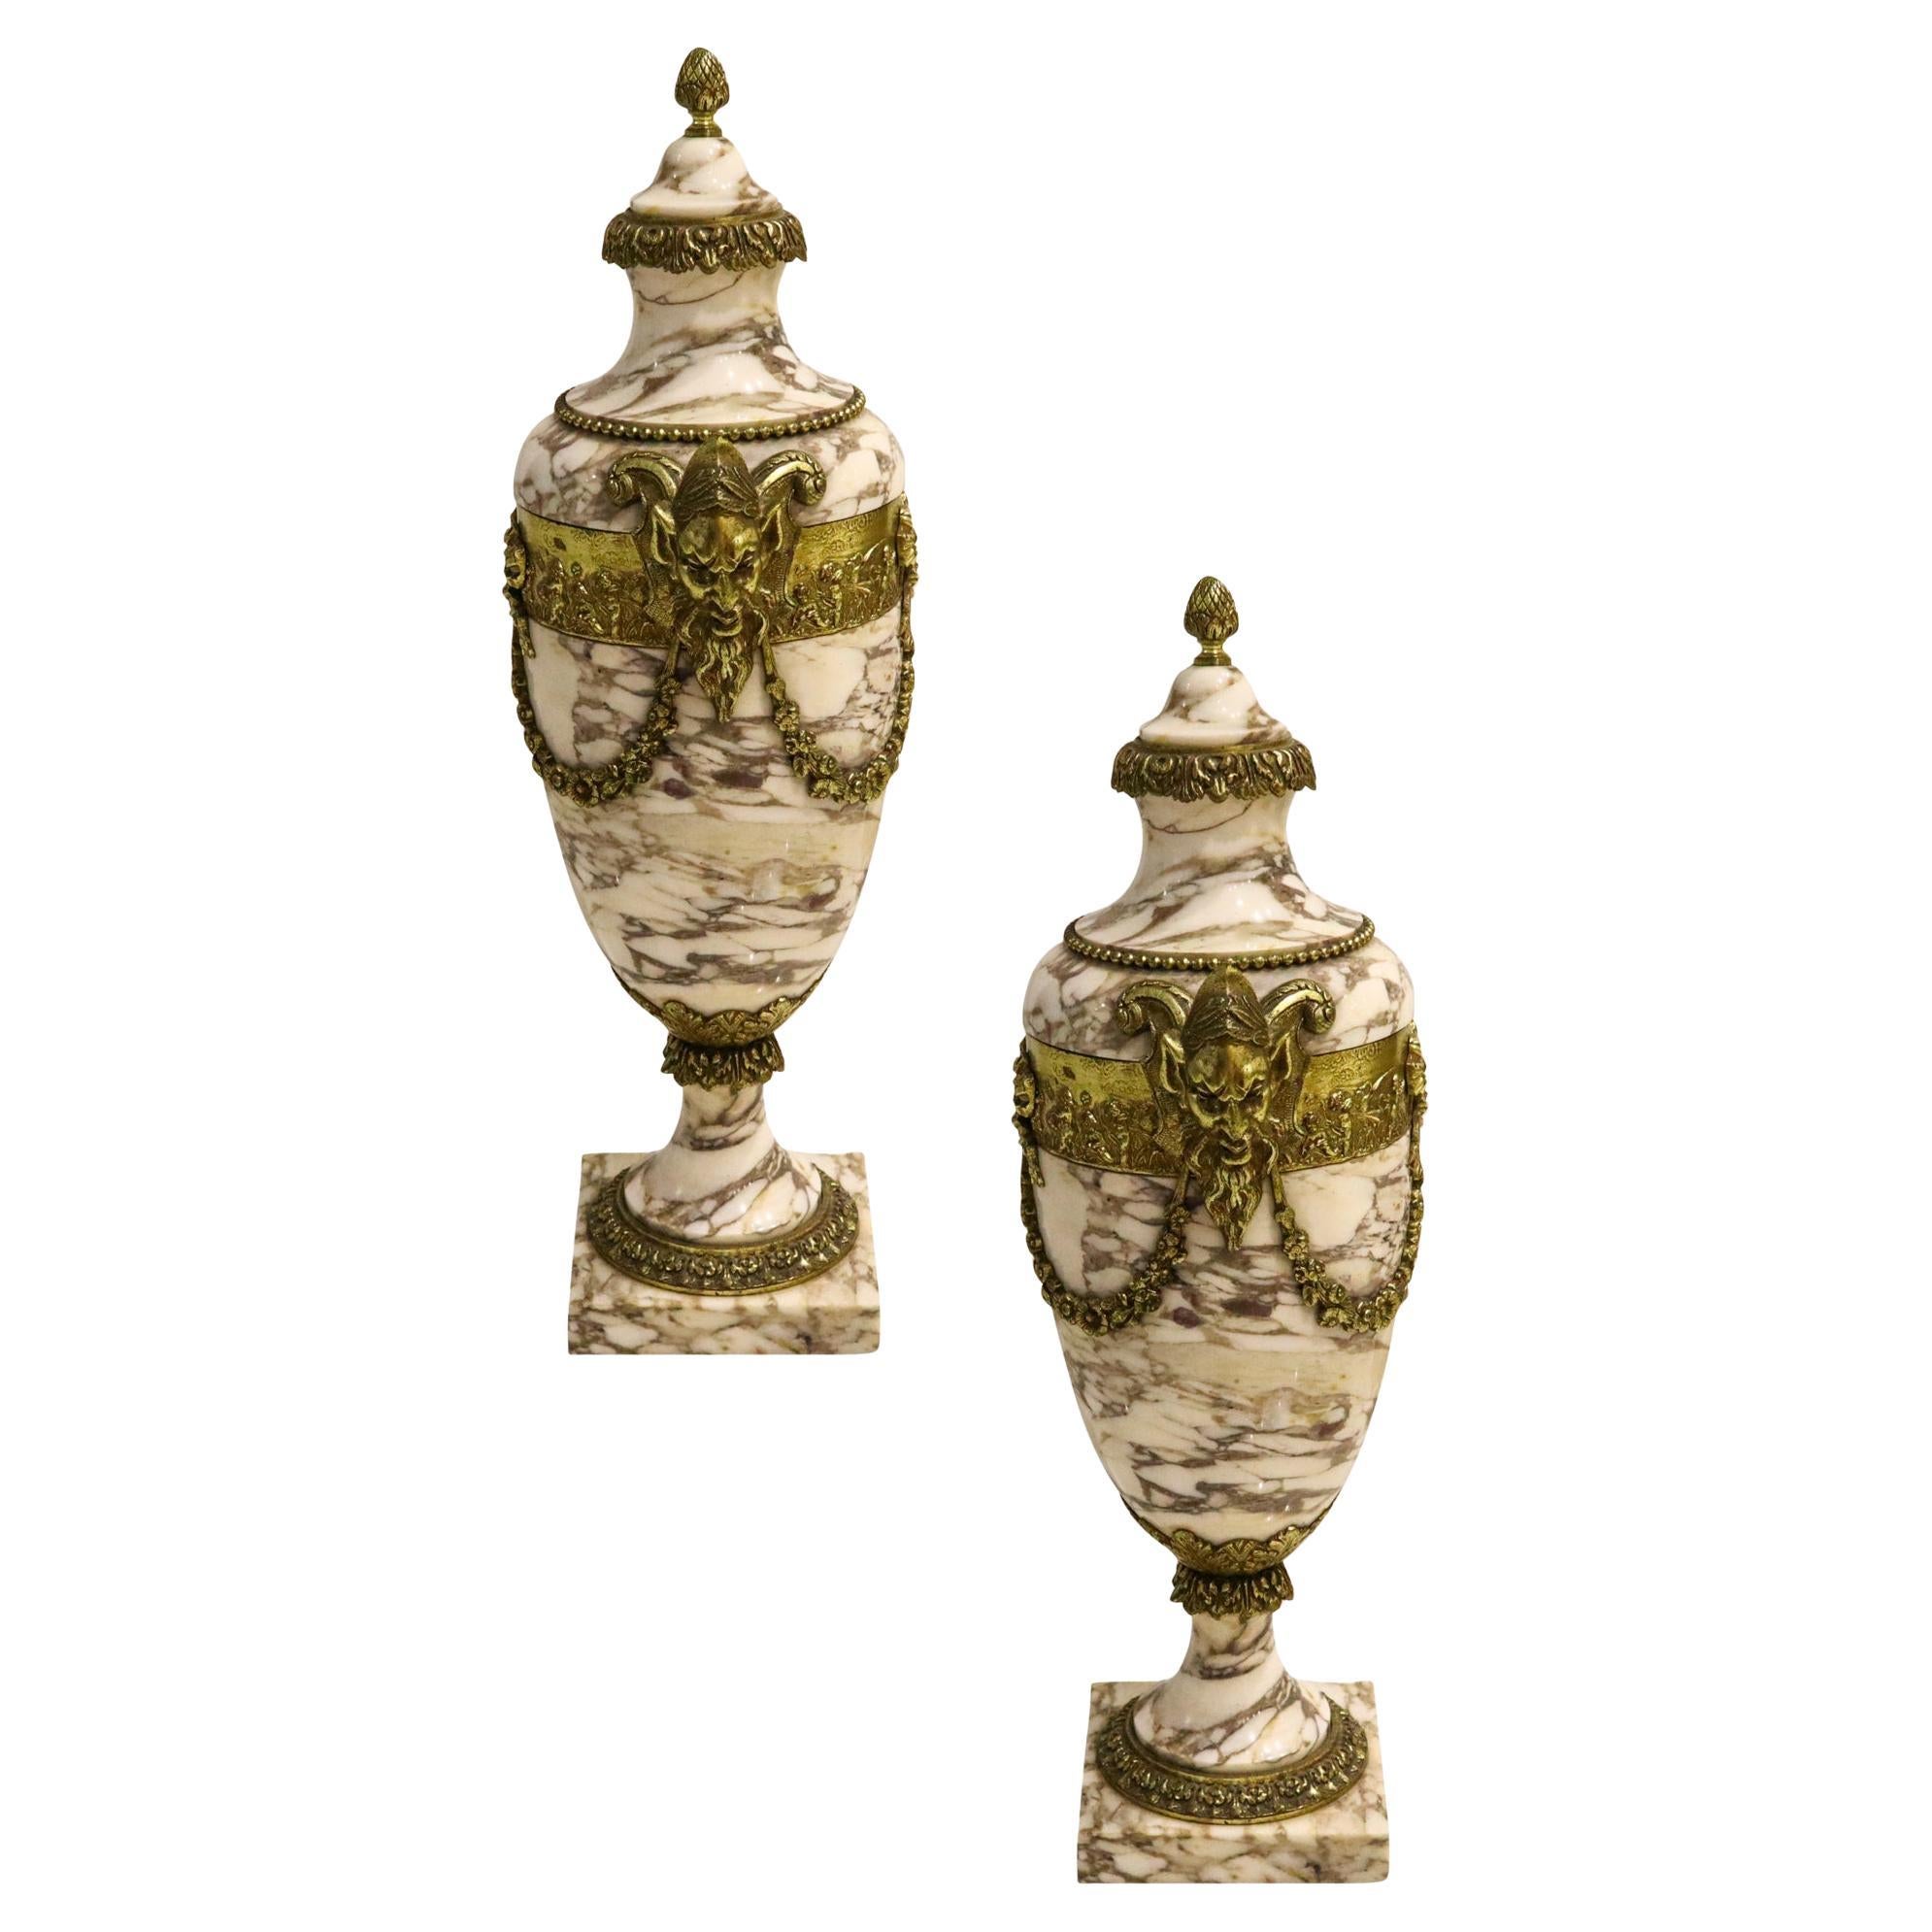 French 1870 Third Empire Napoleon III Pair of Urns in Marble with Gilded Ormolu